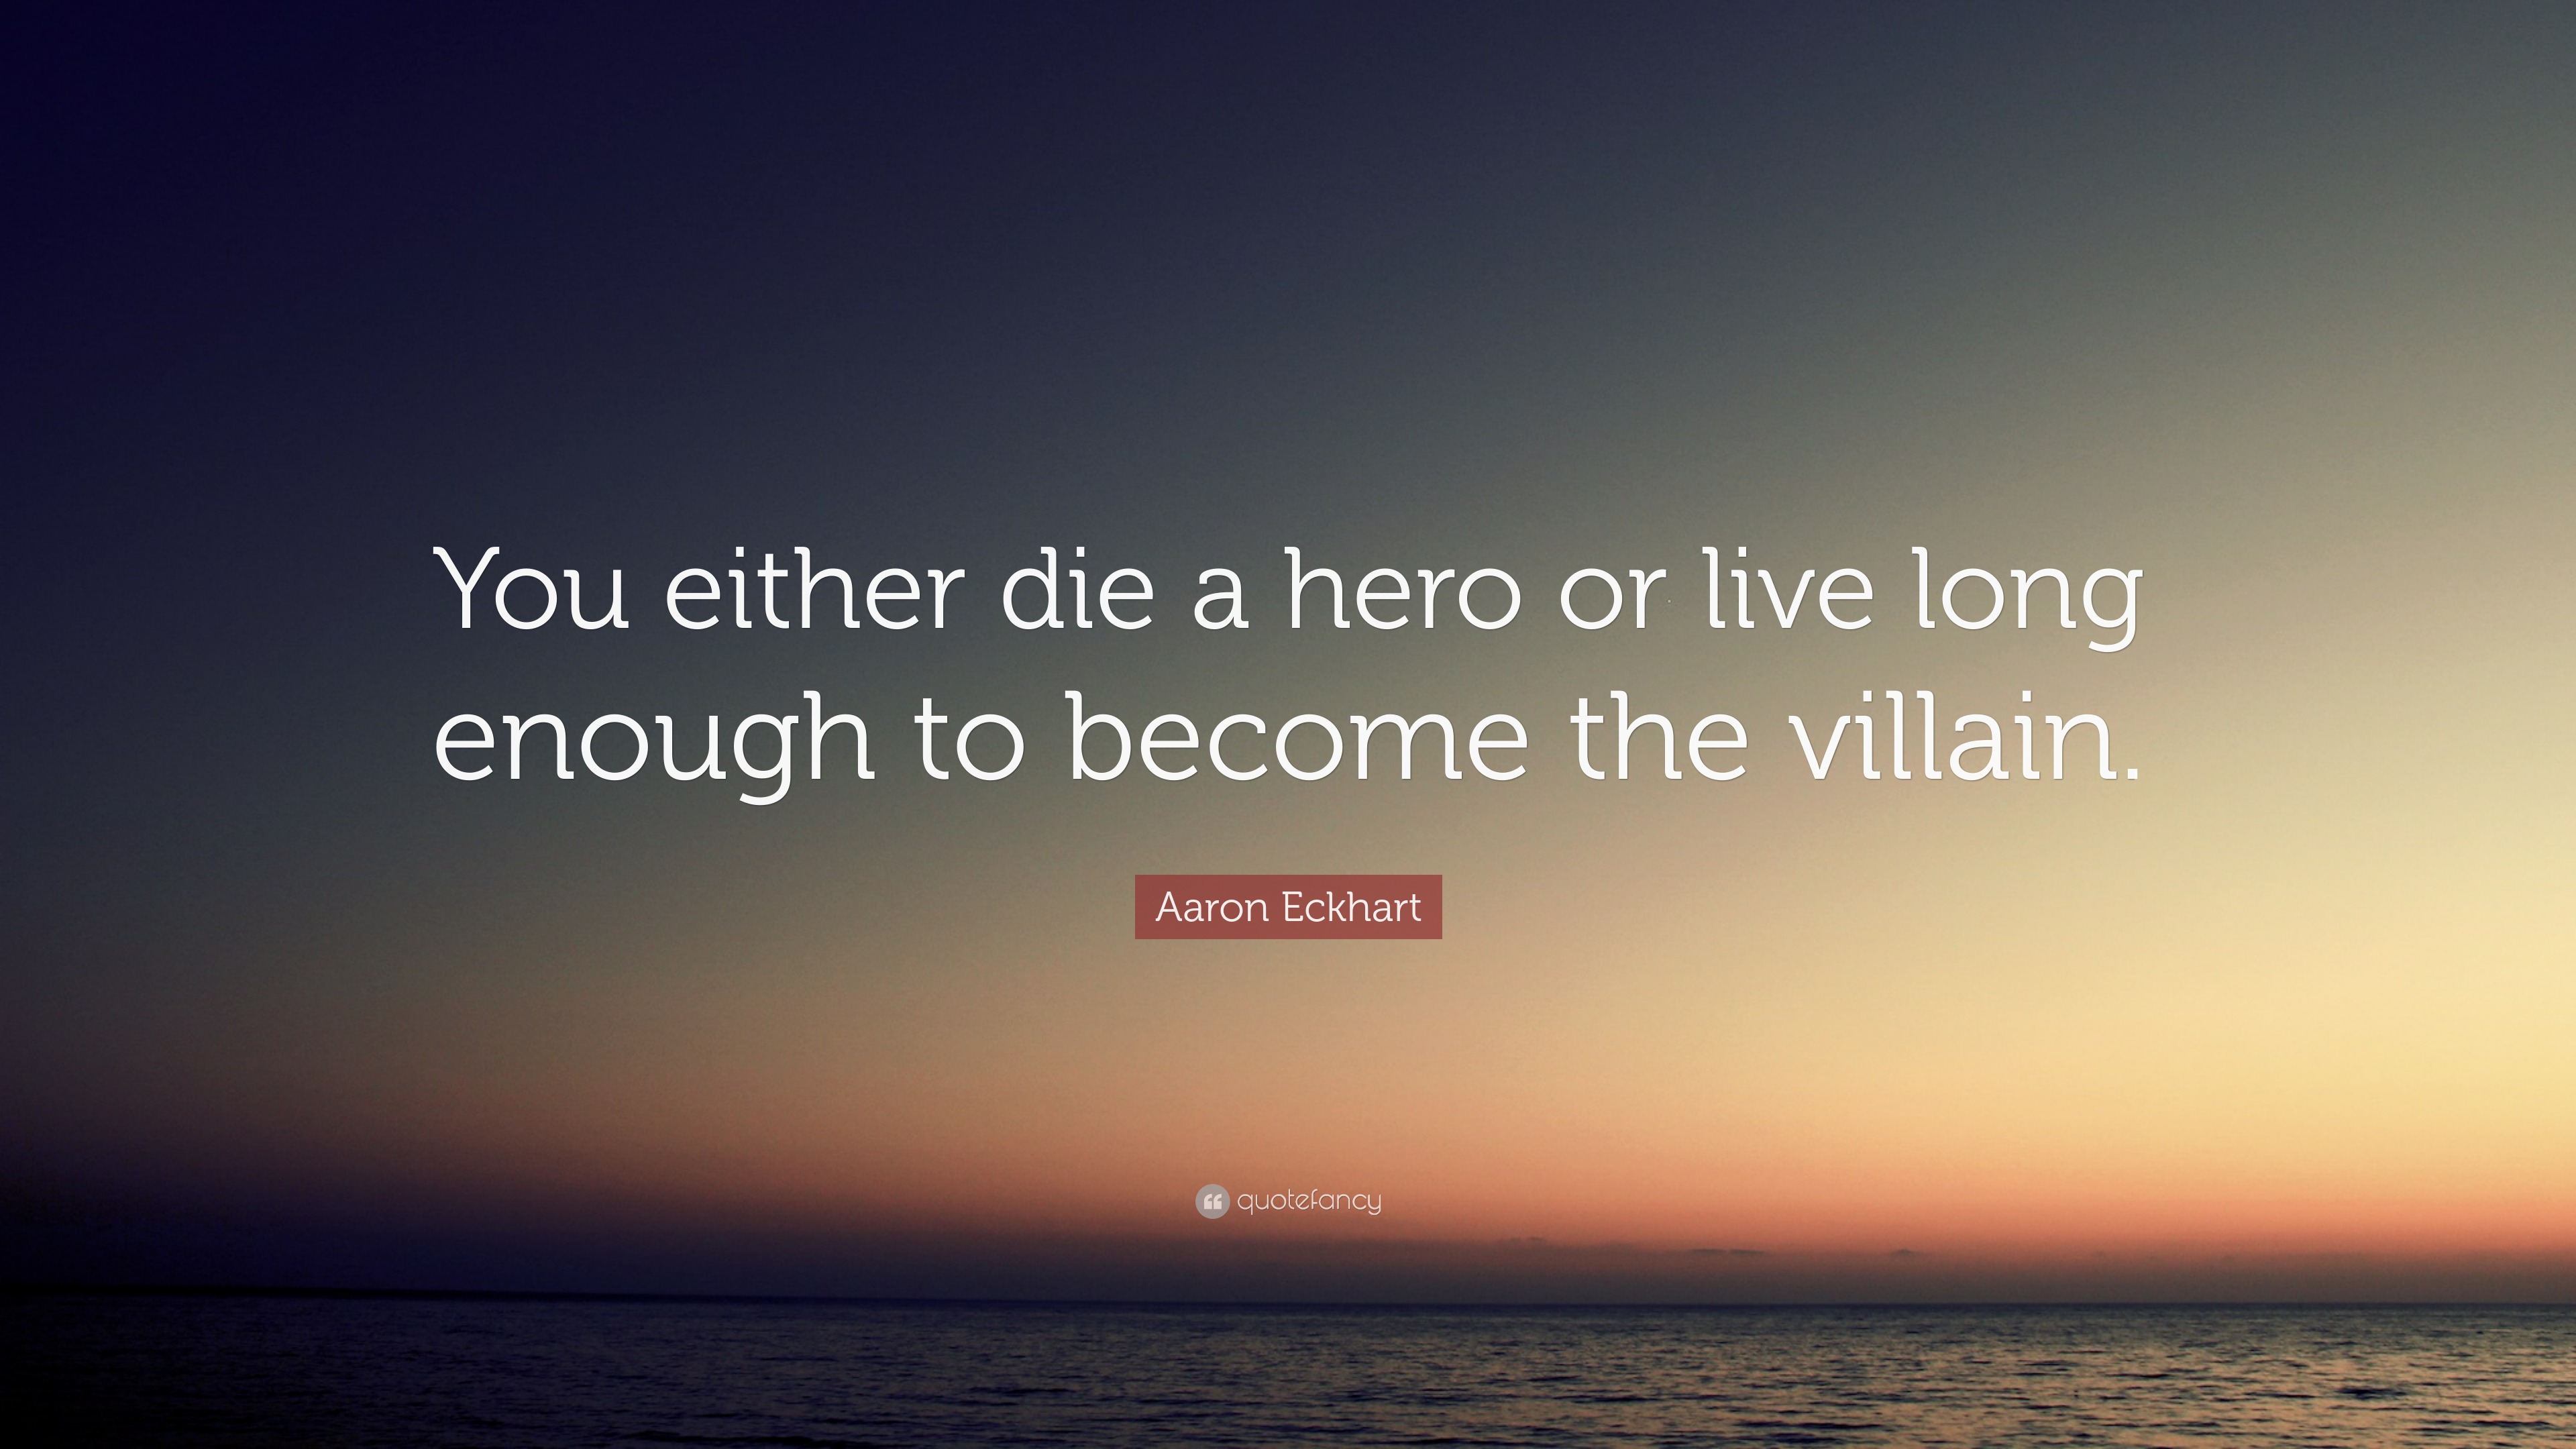 Aaron Eckhart Quote: “You either die a hero or live long enough to ...